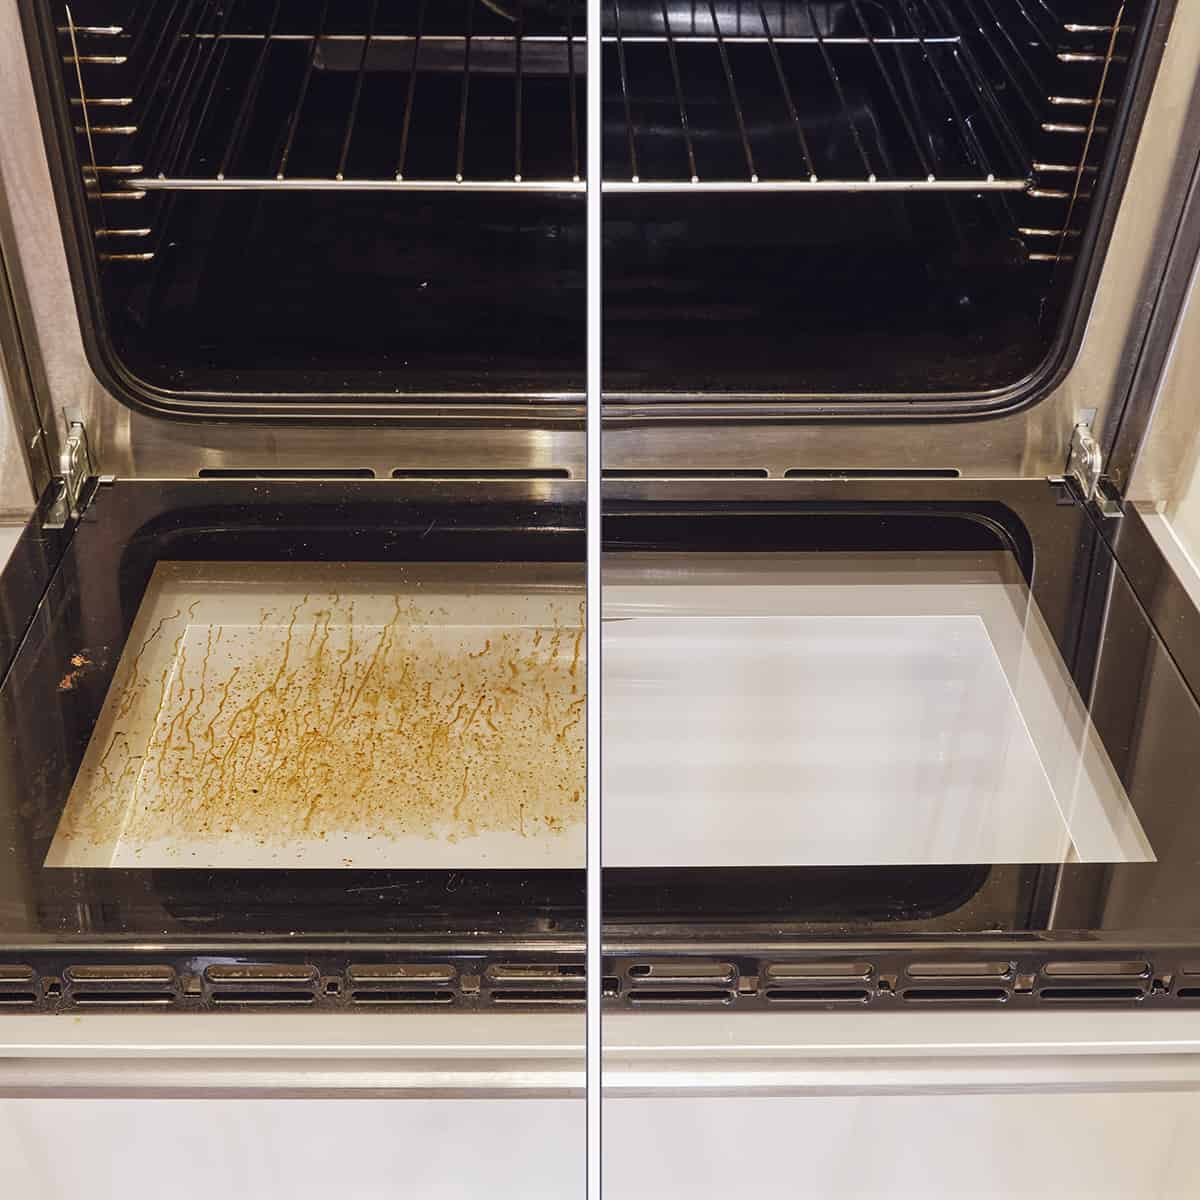 How to prevent oven from getting dirty